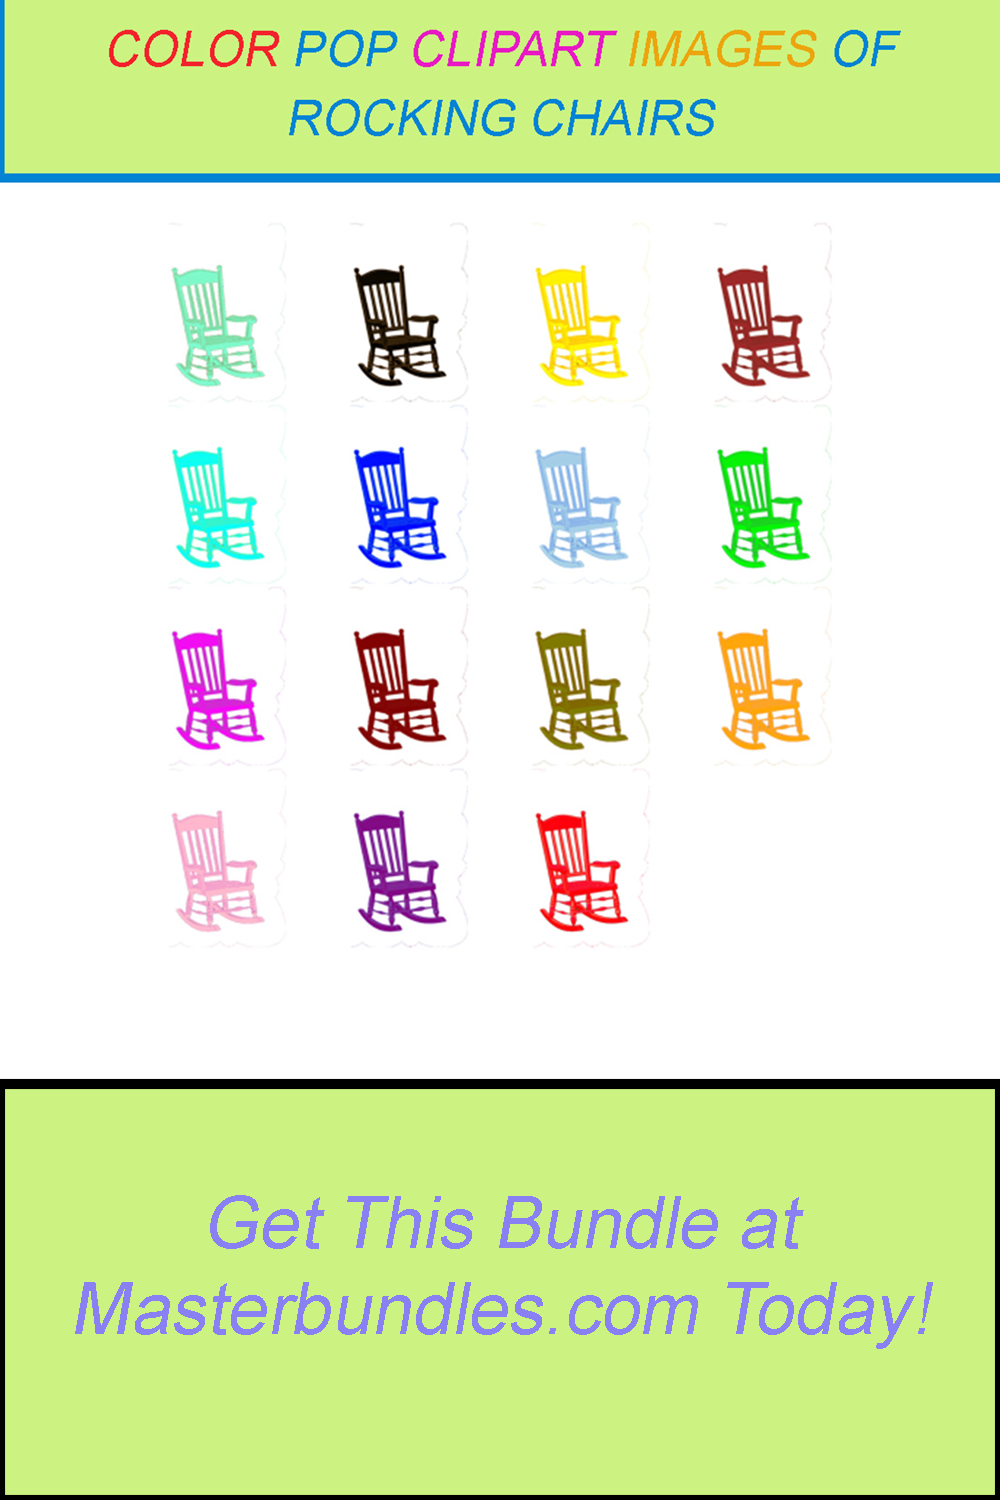 15 COLOR POP CLIPART IMAGES OF ROCKING CHAIRS pinterest preview image.